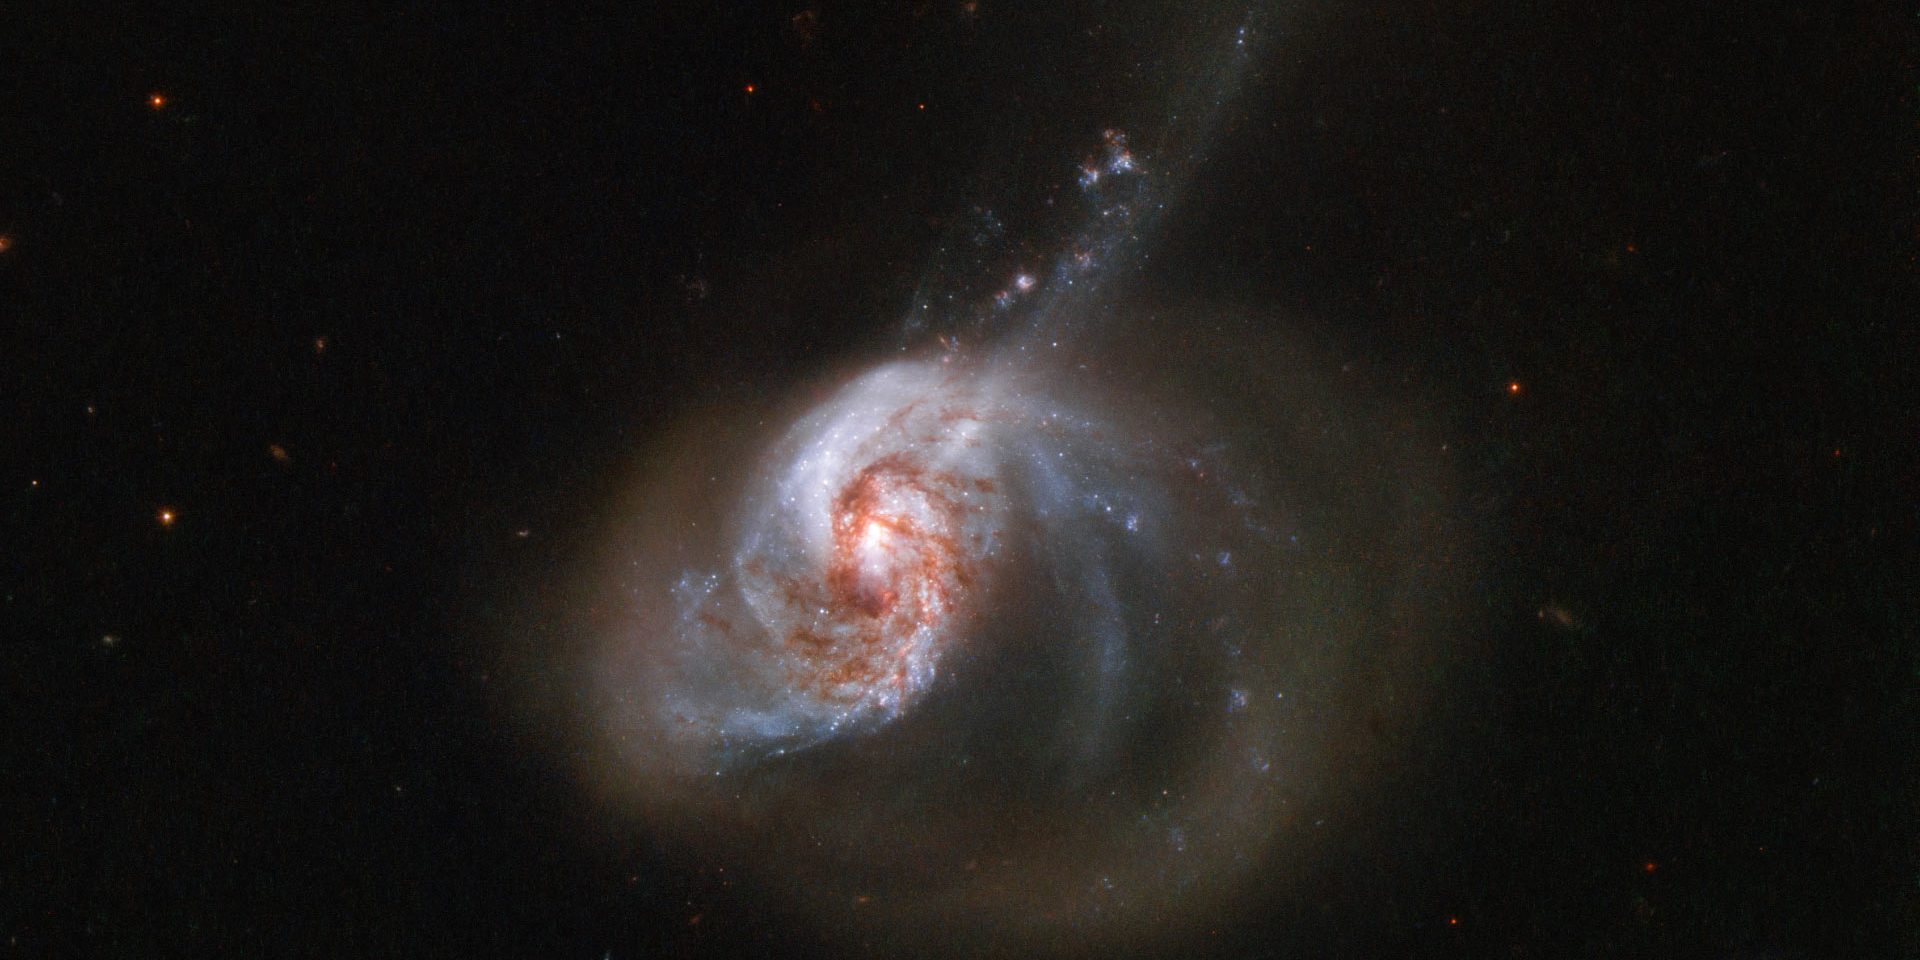 Image depicting NGC 1614, the unique spiral galaxy